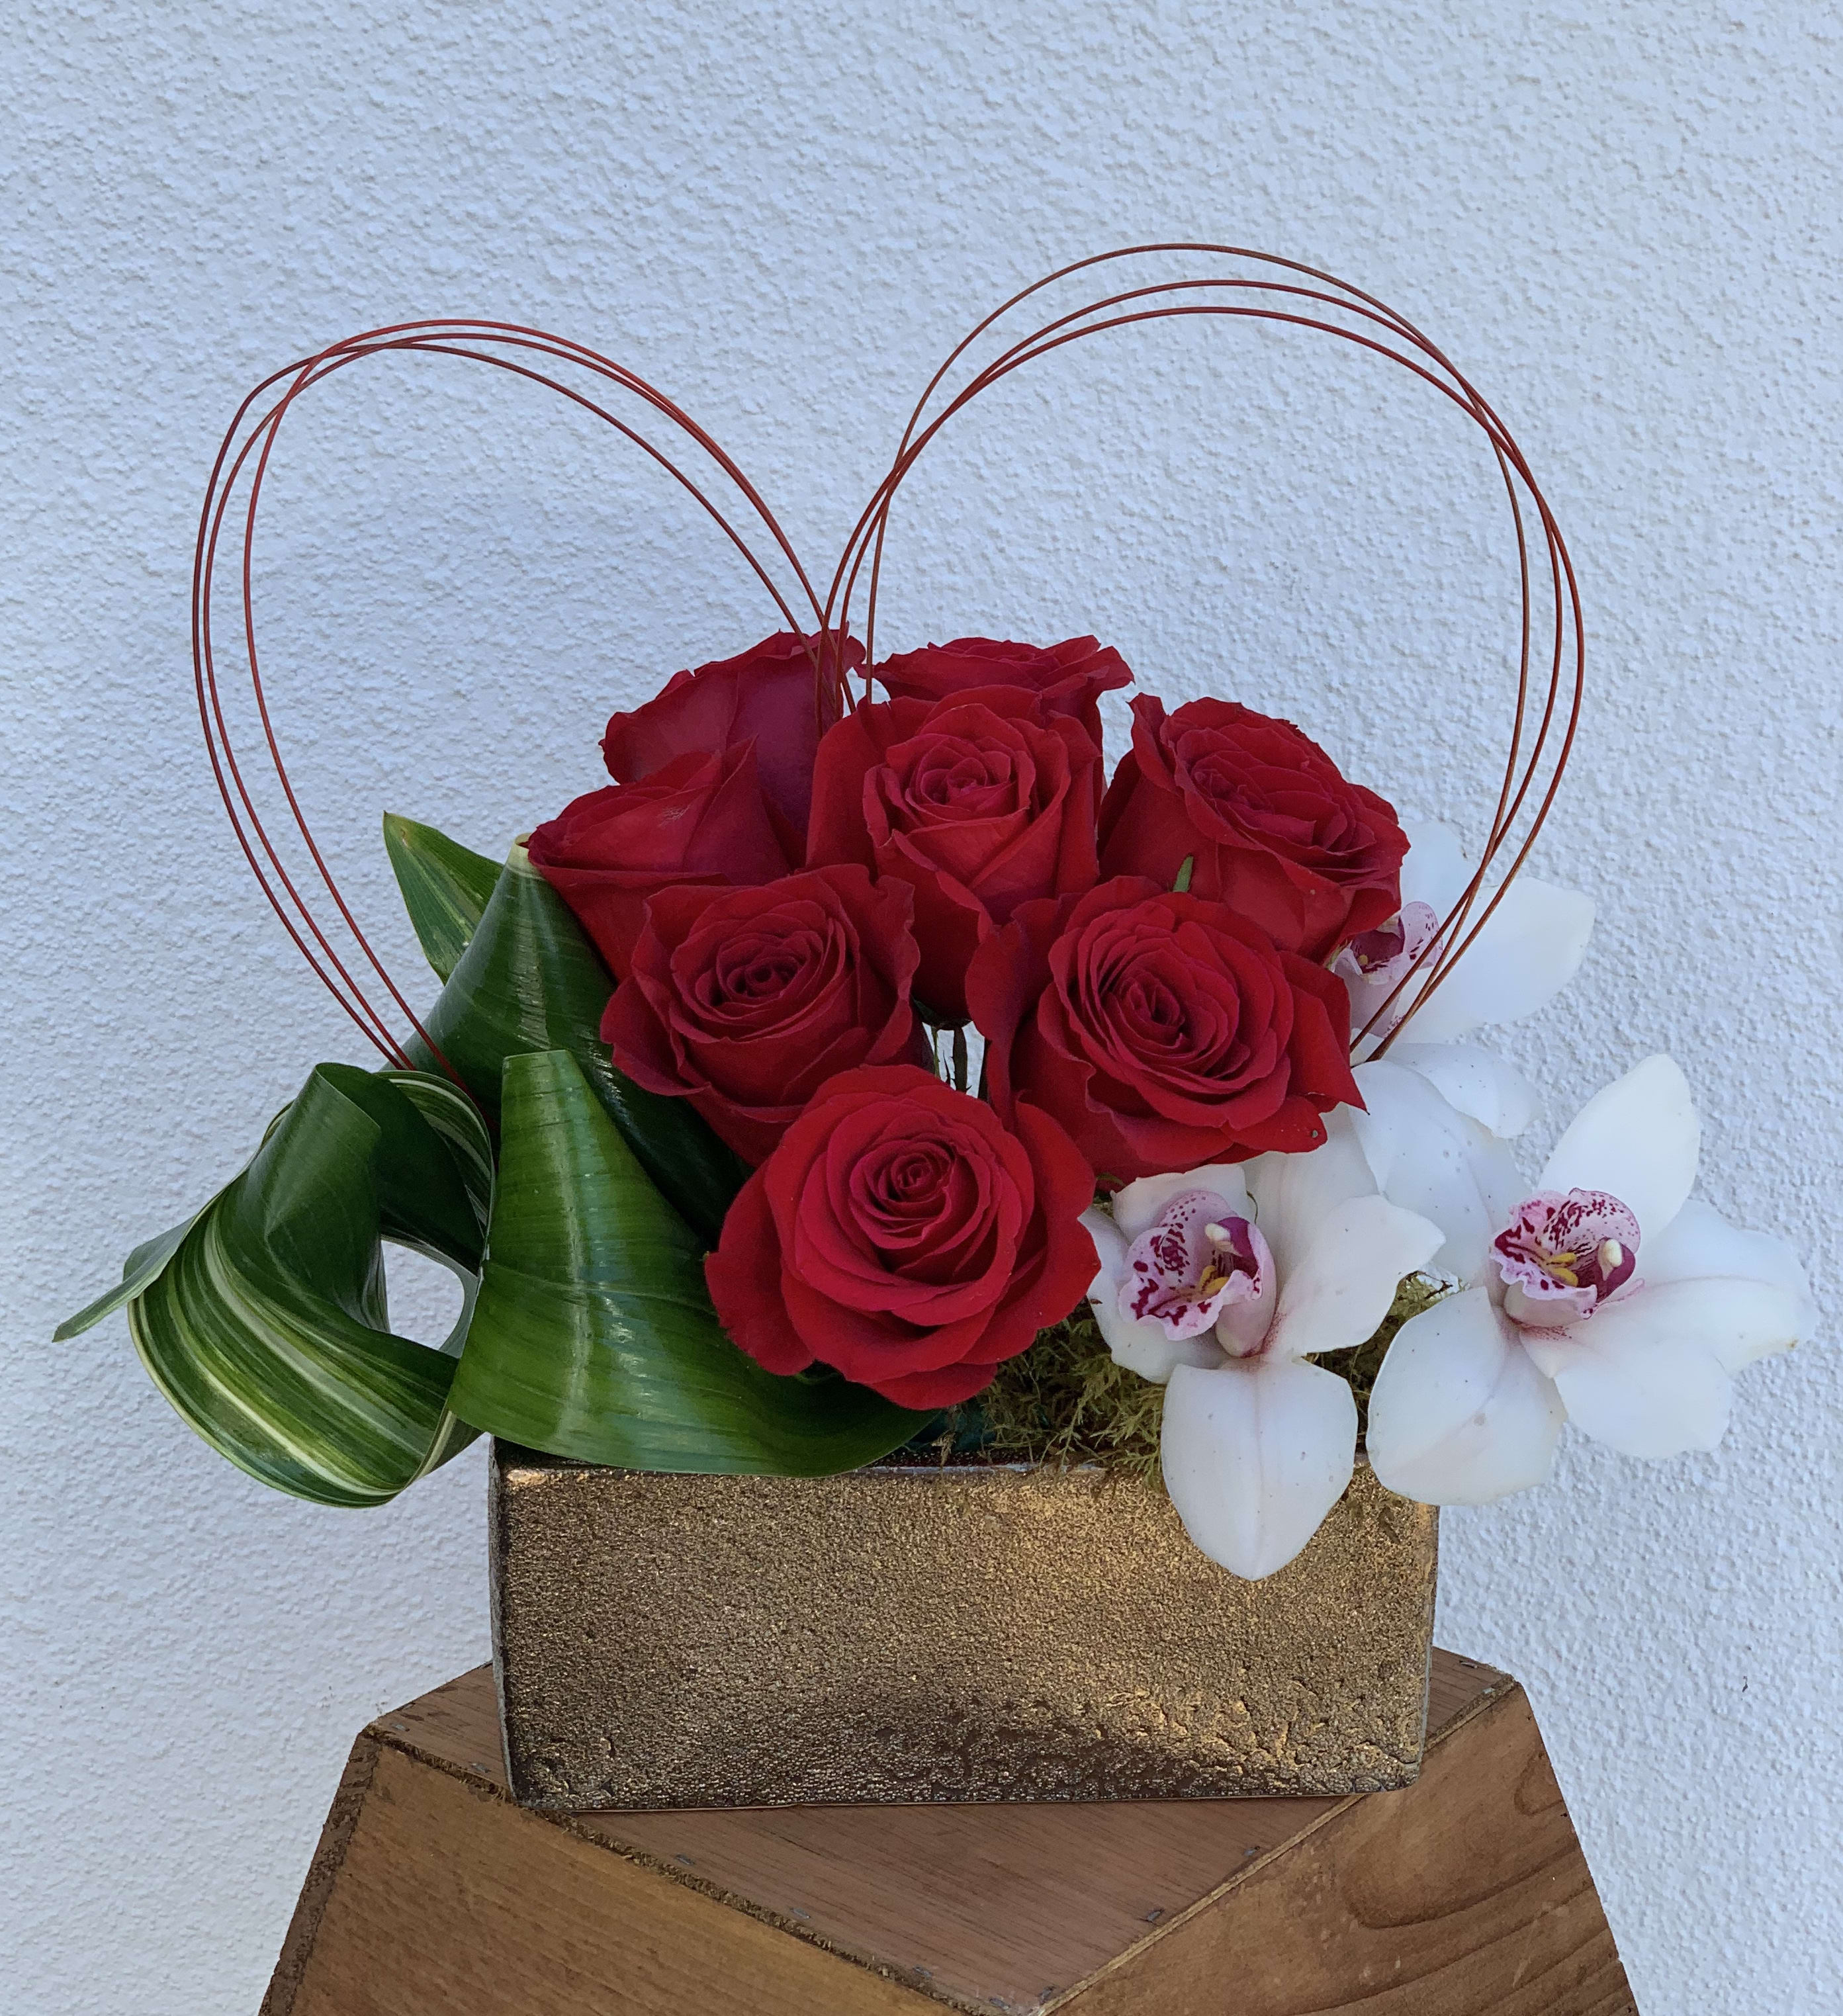 From the heart - A beautiful arrangement of red roses, cymbidium orchids, and aspidistra leaf in a ceramic vase.  This will surely show them how much you love them.  